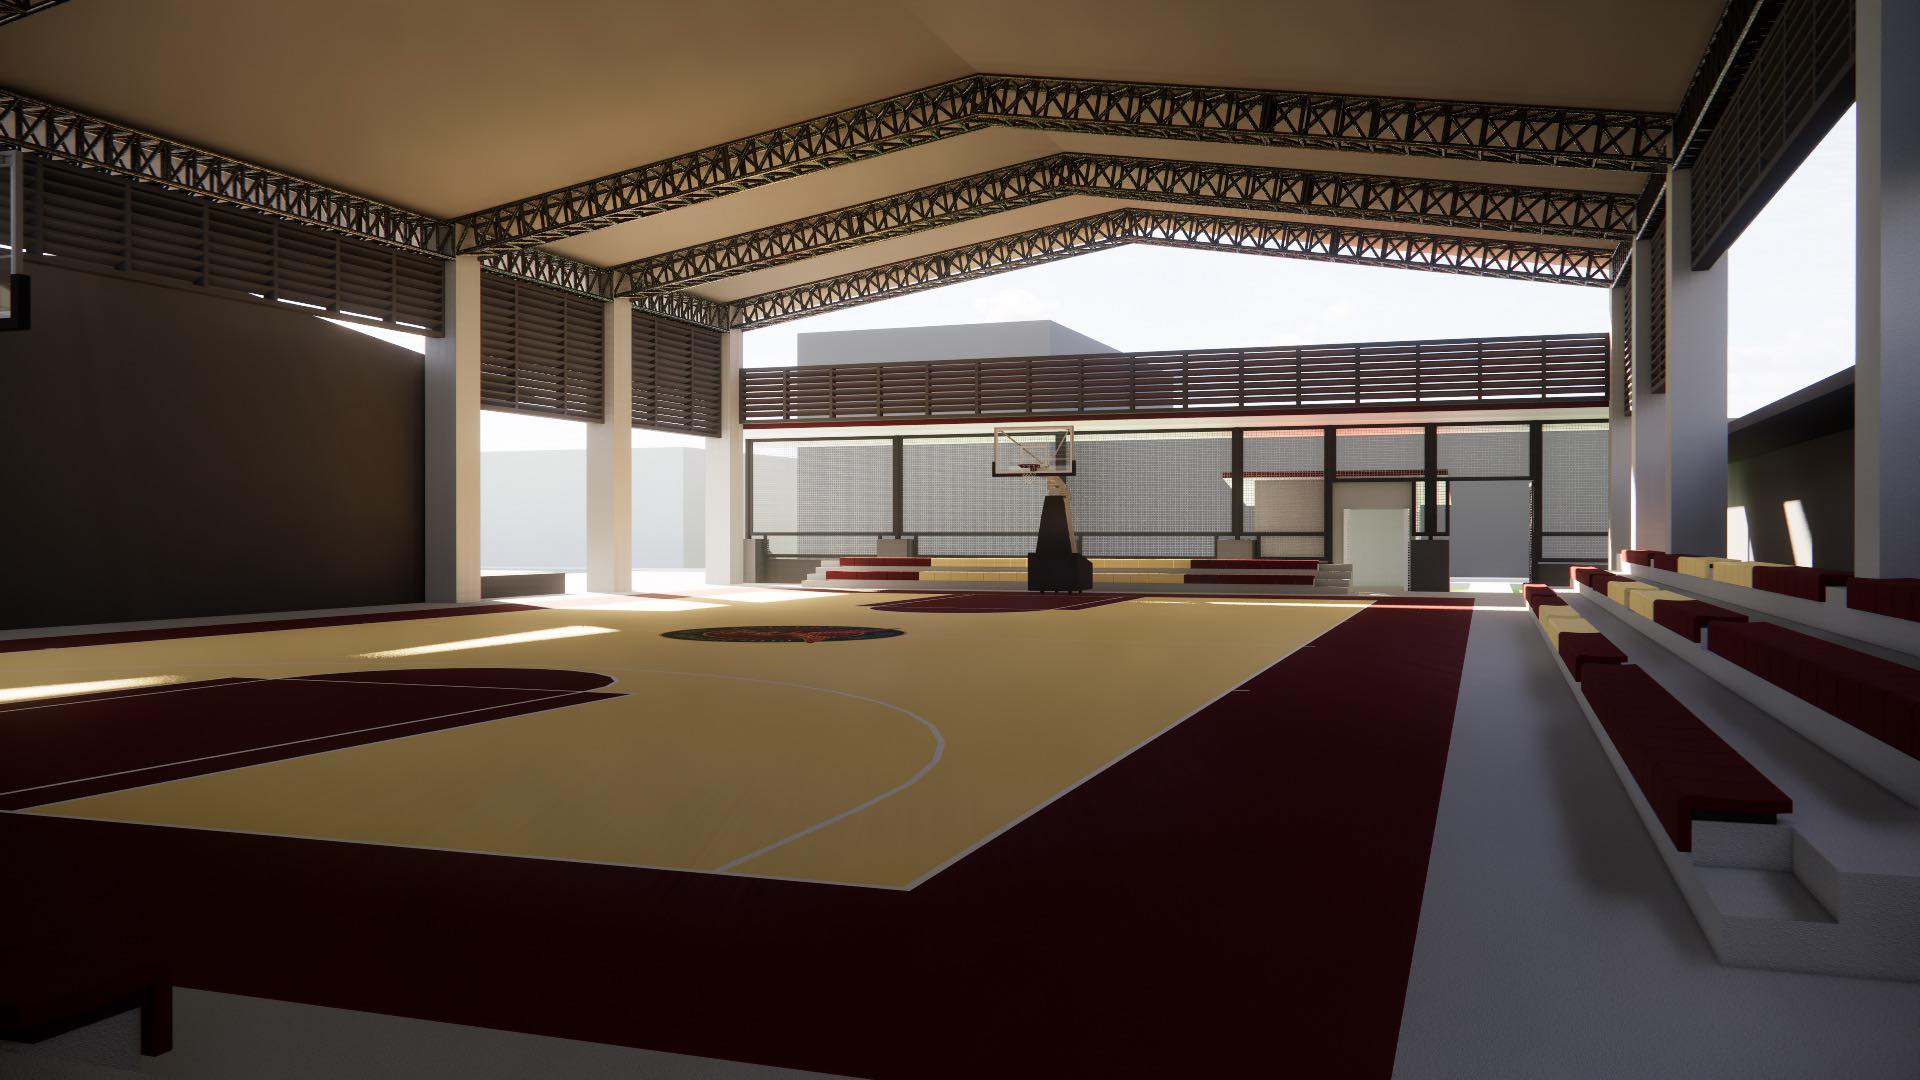 UPV Iloilo City campus court set for transformation into a sports facility 